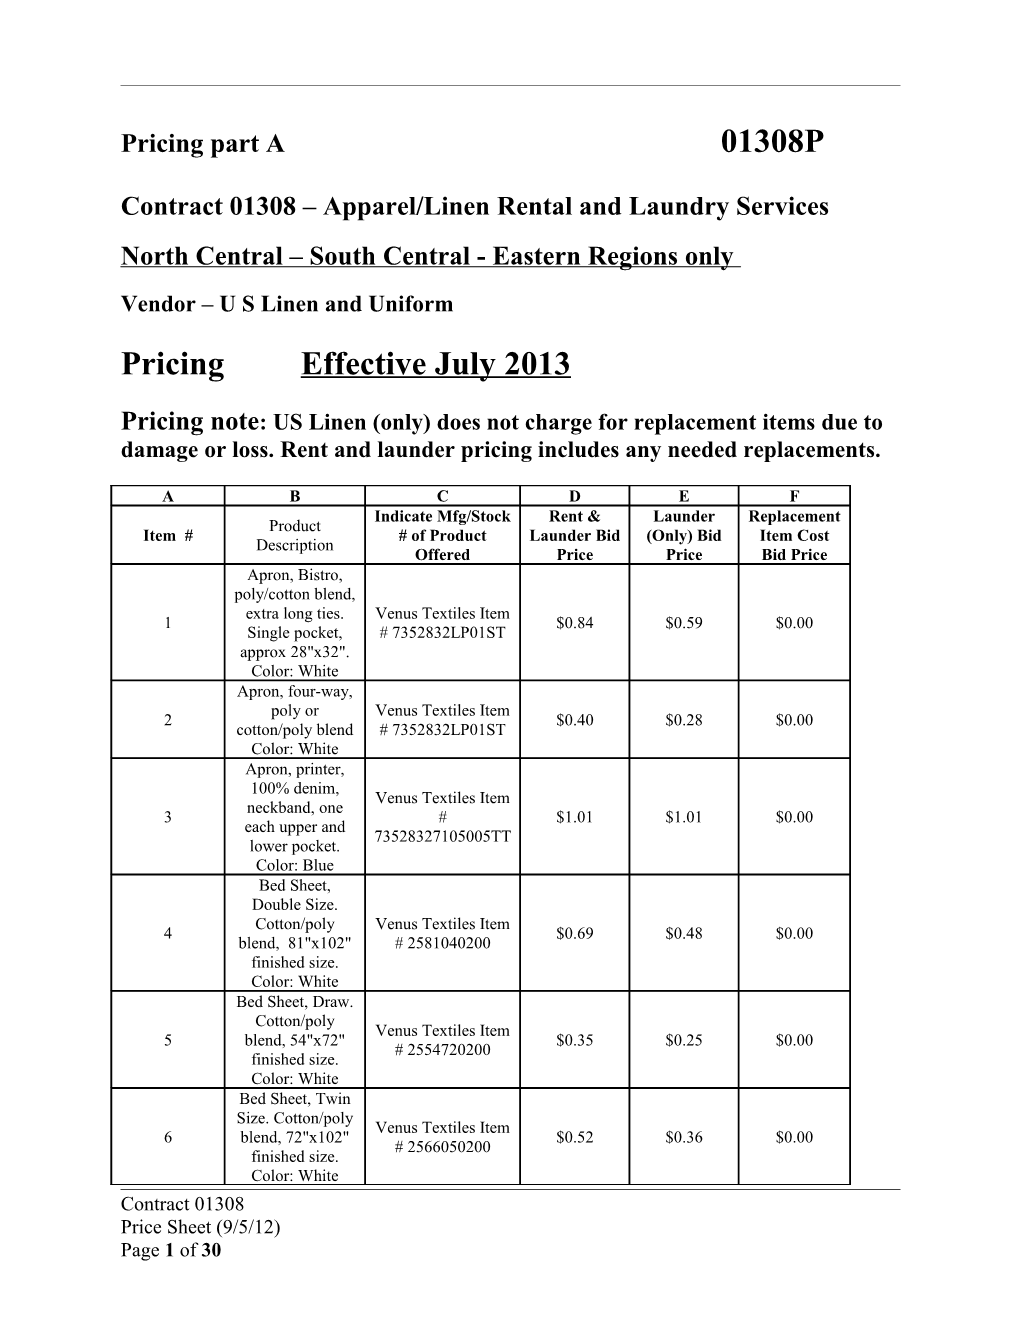 Contract 01308 Apparel/Linen Rental and Laundry Services